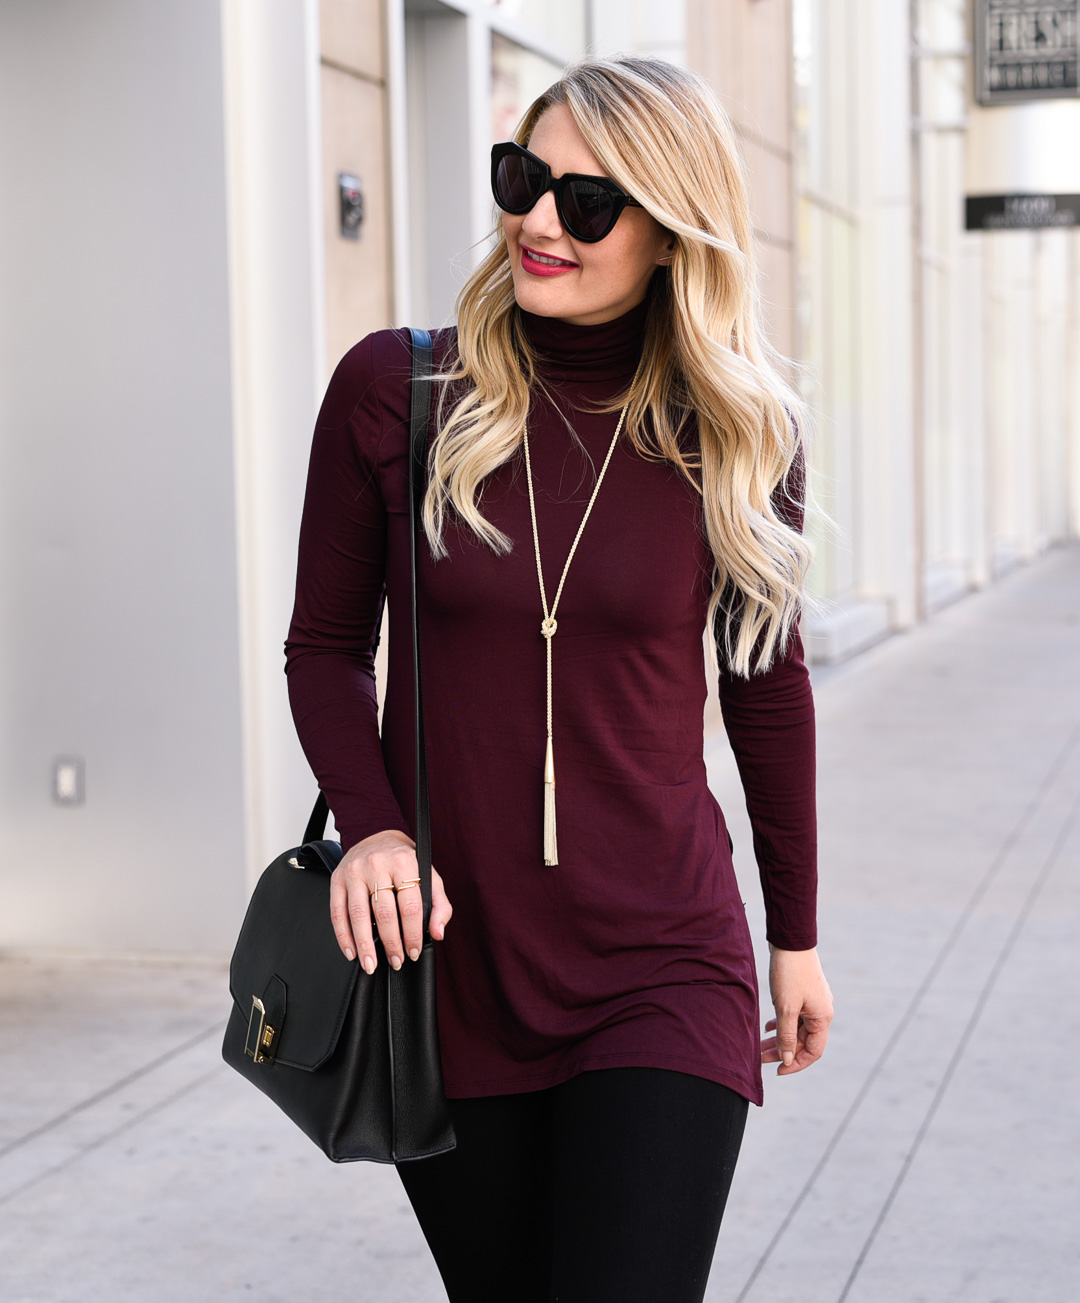 Jenna Colgrove wearing a wine colored turtleneck sweater and a Kendra Scott Phara tassel necklace. 